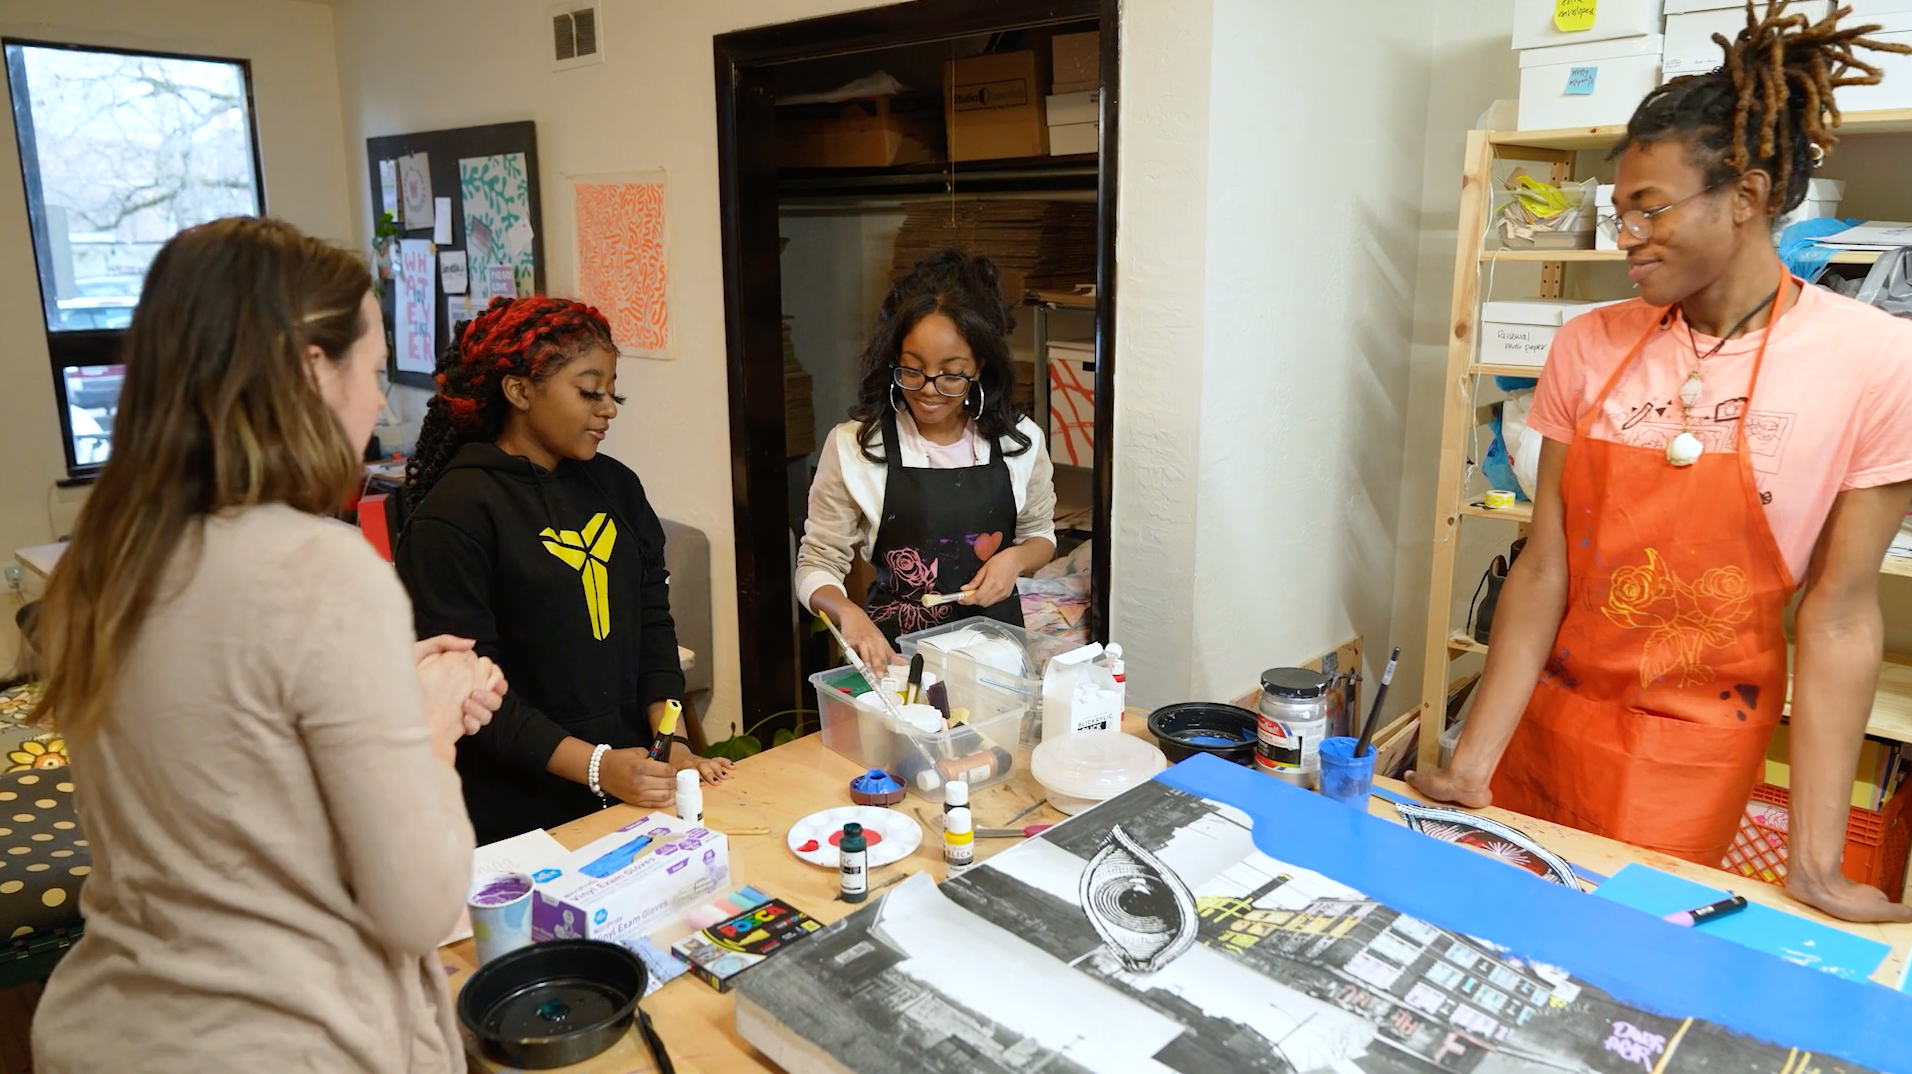 Load video: The Wilkinsburg and Braddock Youth Project and Meshwork Press show Sense of Self is featured at the Lohr Gallery at the Wilkinsburg Community Development Corporation